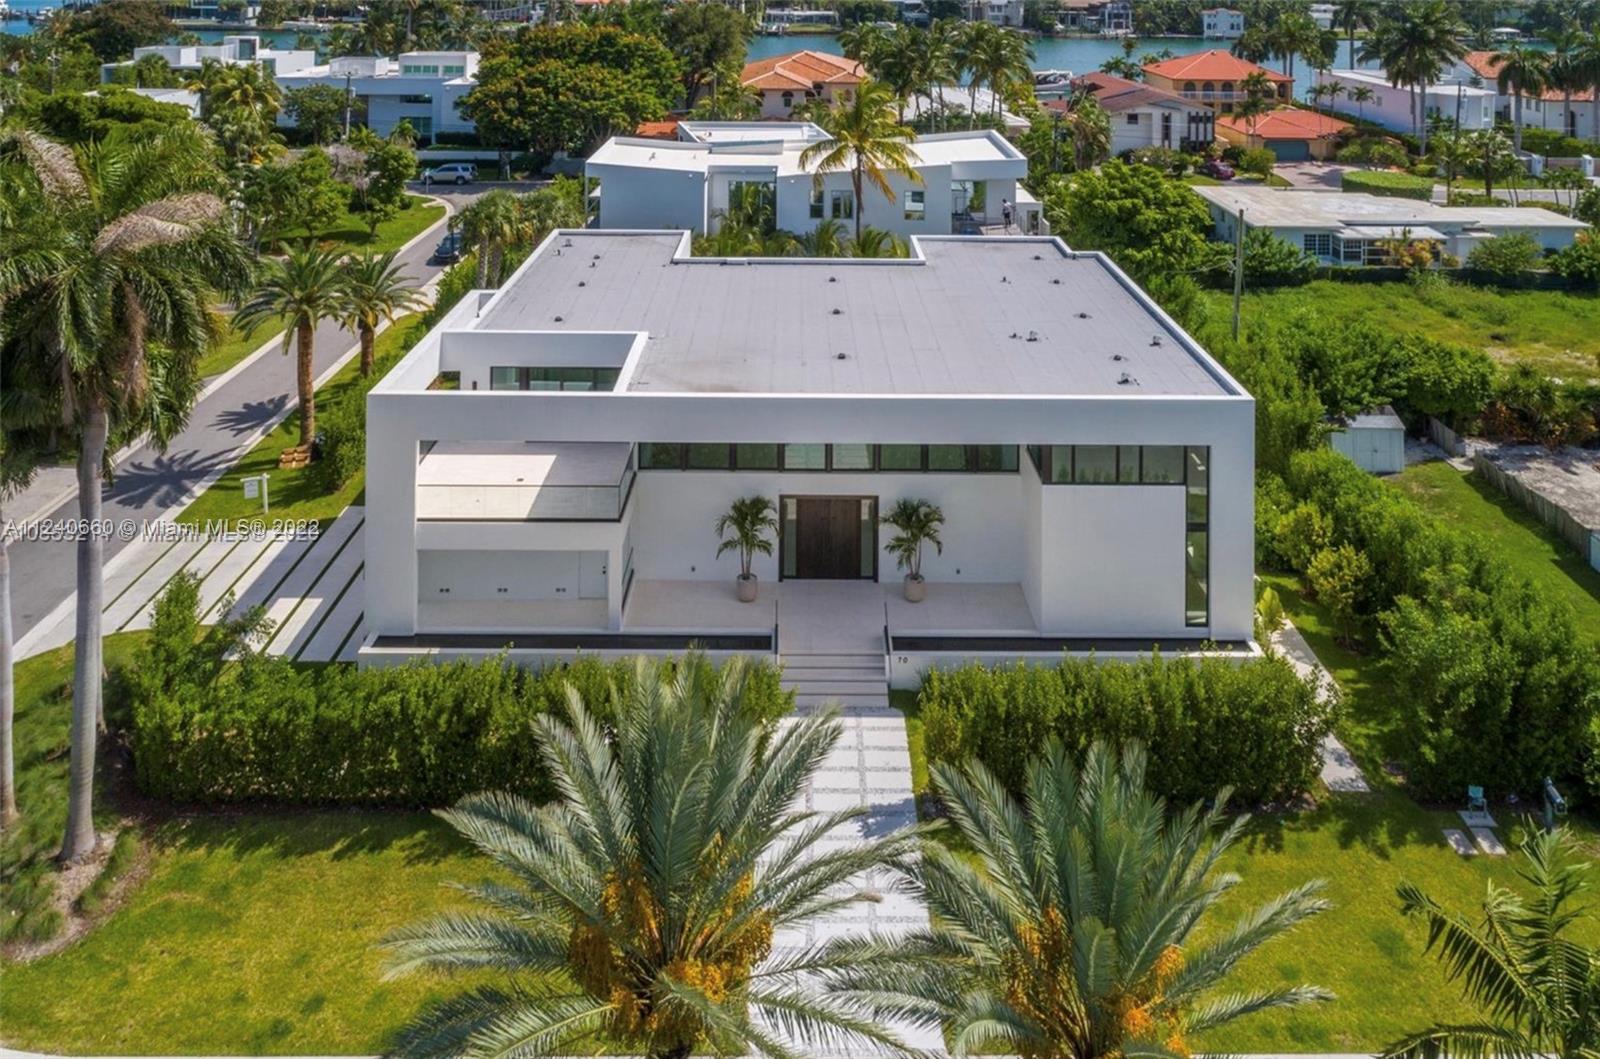 New modern and wonderful house on gated and secured Hibiscus Island. This exquisitely designed (6 bed/6/1 bath) masterpiece was built on a corner lot, with a private entry garden capturing sea breeze, natural light and enhancing views. It features 22 ft high ceilings, white oak hardwood floors and a stunning glass enclosed outdoor balcony. The kitchen is an epicurean delight with a large cooking island, Miele and Wolf appliances. the dining Room opens to the outdoor terrace with a kitchen and bar - perfect for seamless indoor/outdoor entertaining for family and friends. The master bedroom features a sitting area his and hers closets and ample master bathroom. Outside enjoy lounging by the lap pool in the covered terrace.